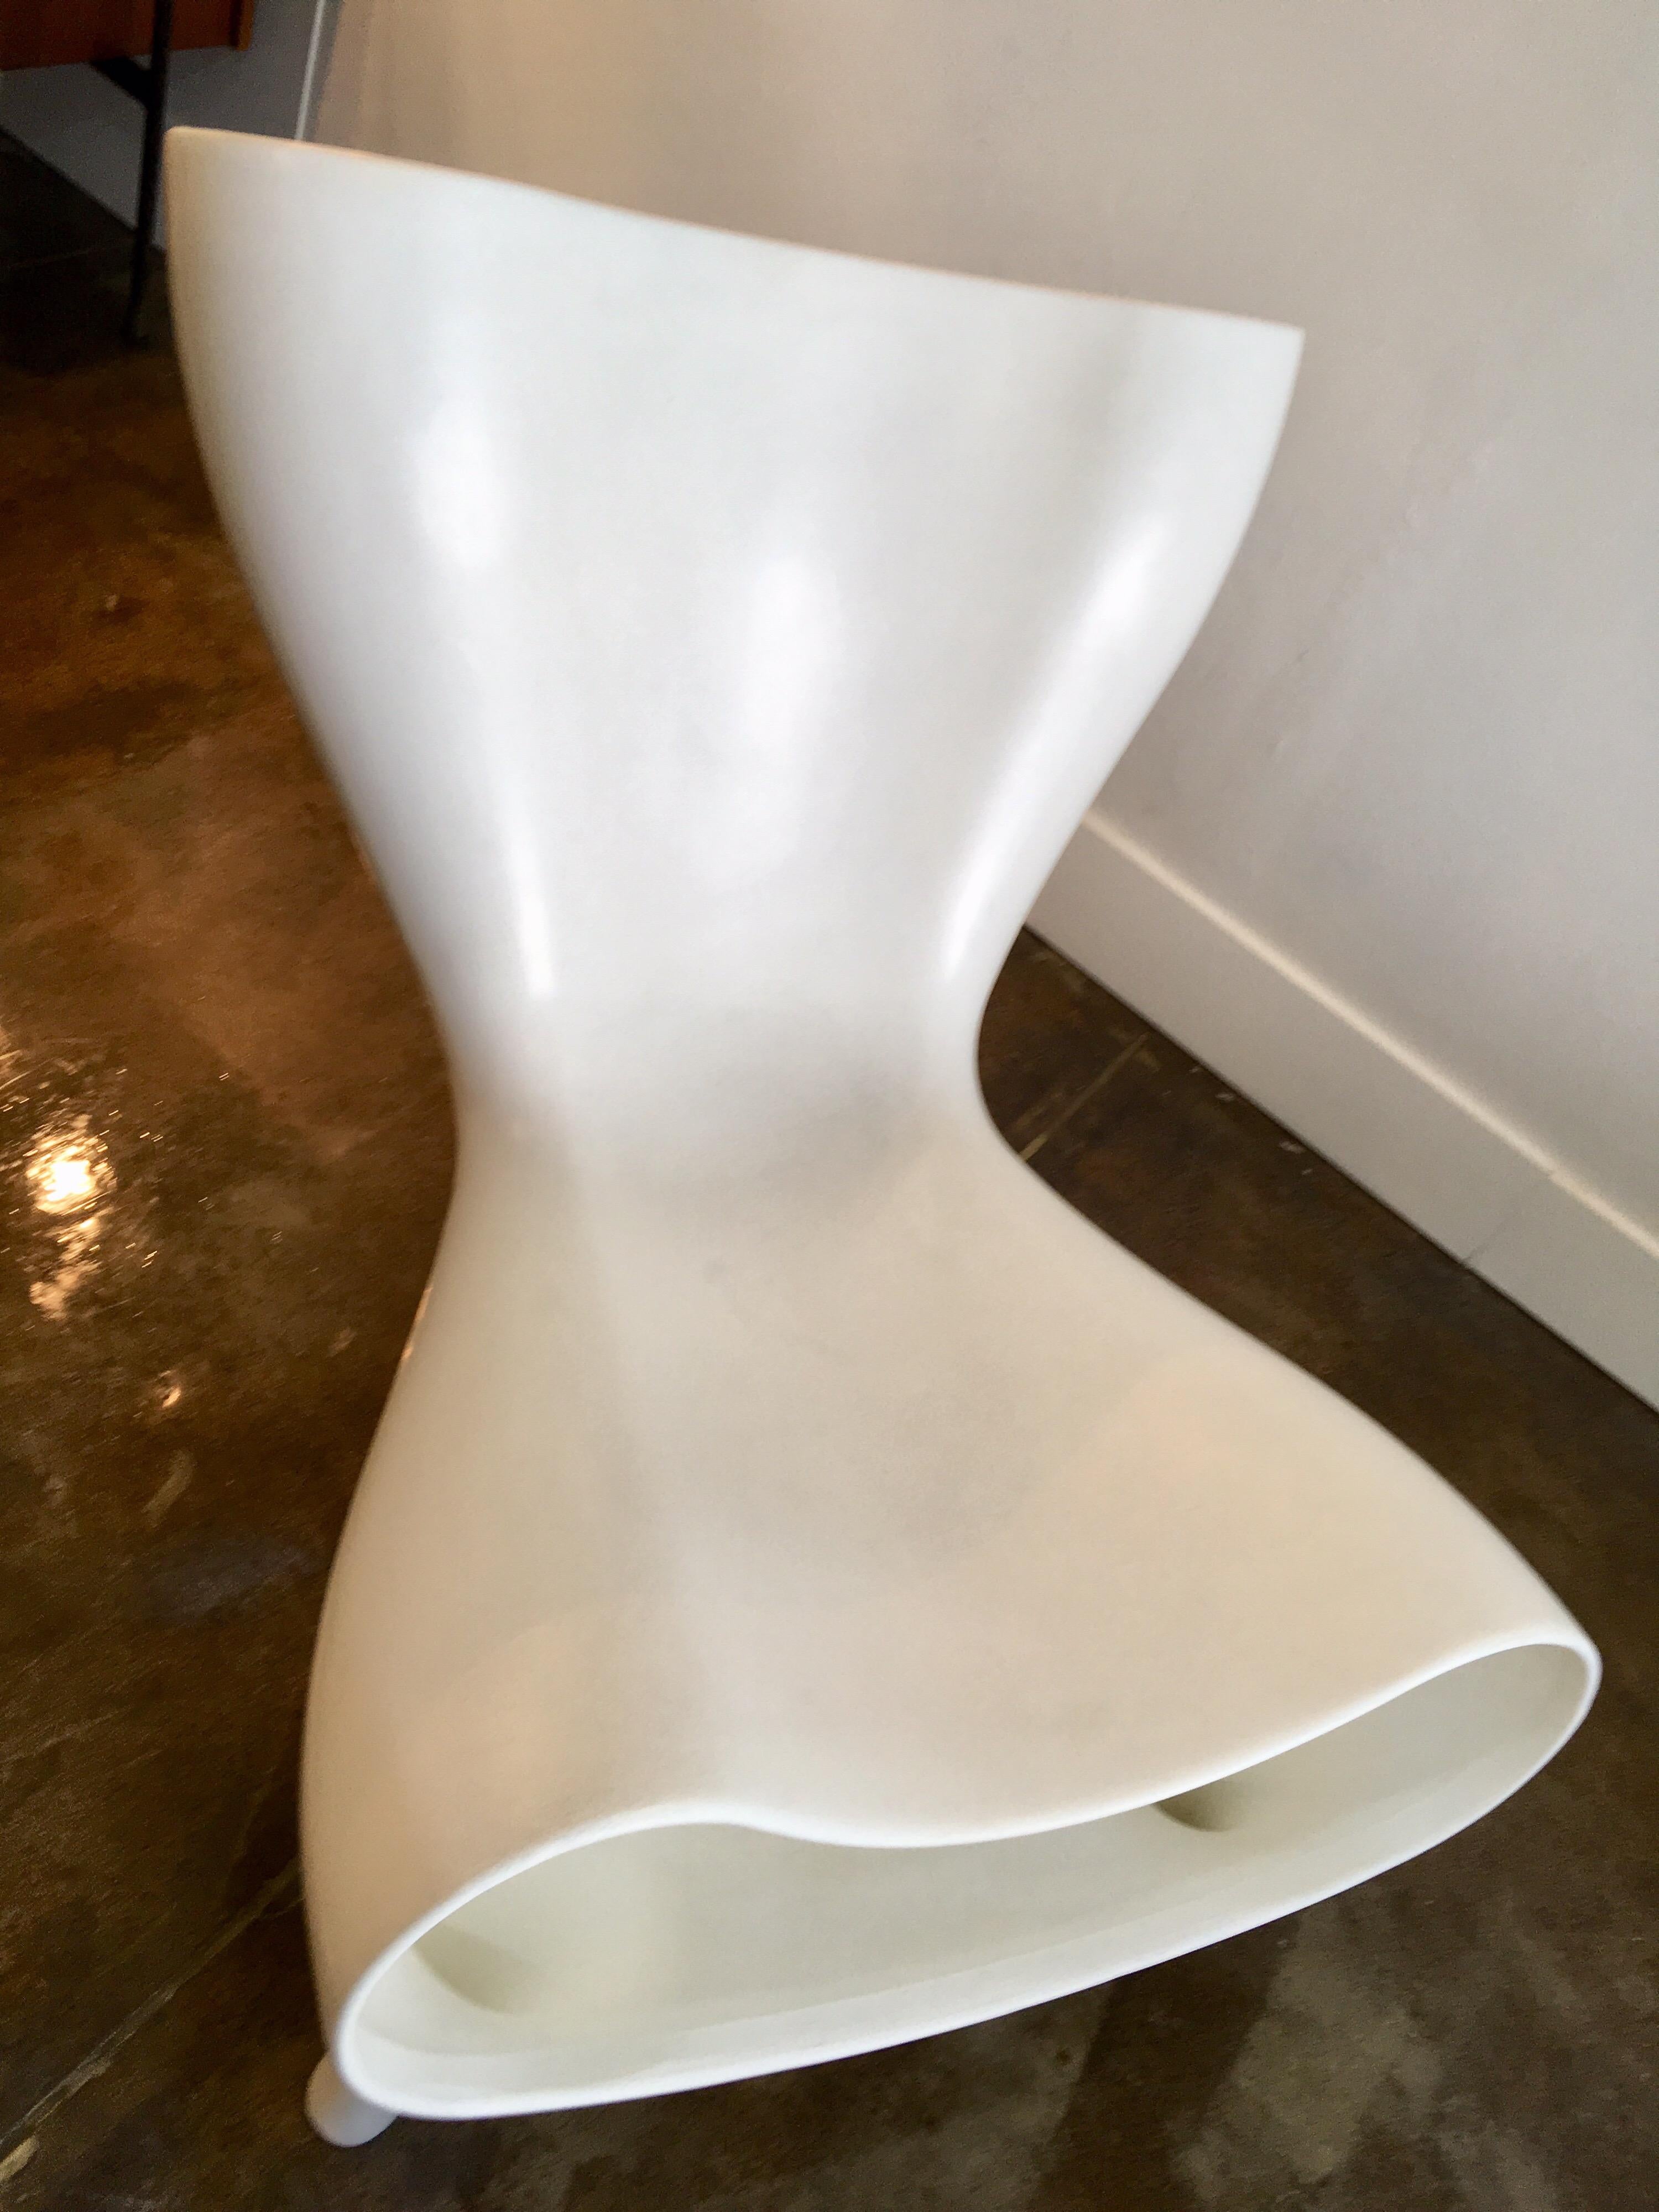 Marc Newson Orgone chair for Cassina, 1998. A sculptural work of art, this chair is a unique chair is a real collector's item.

Presents in very good original condition with minor wear commensurate with age (can provide extra images if